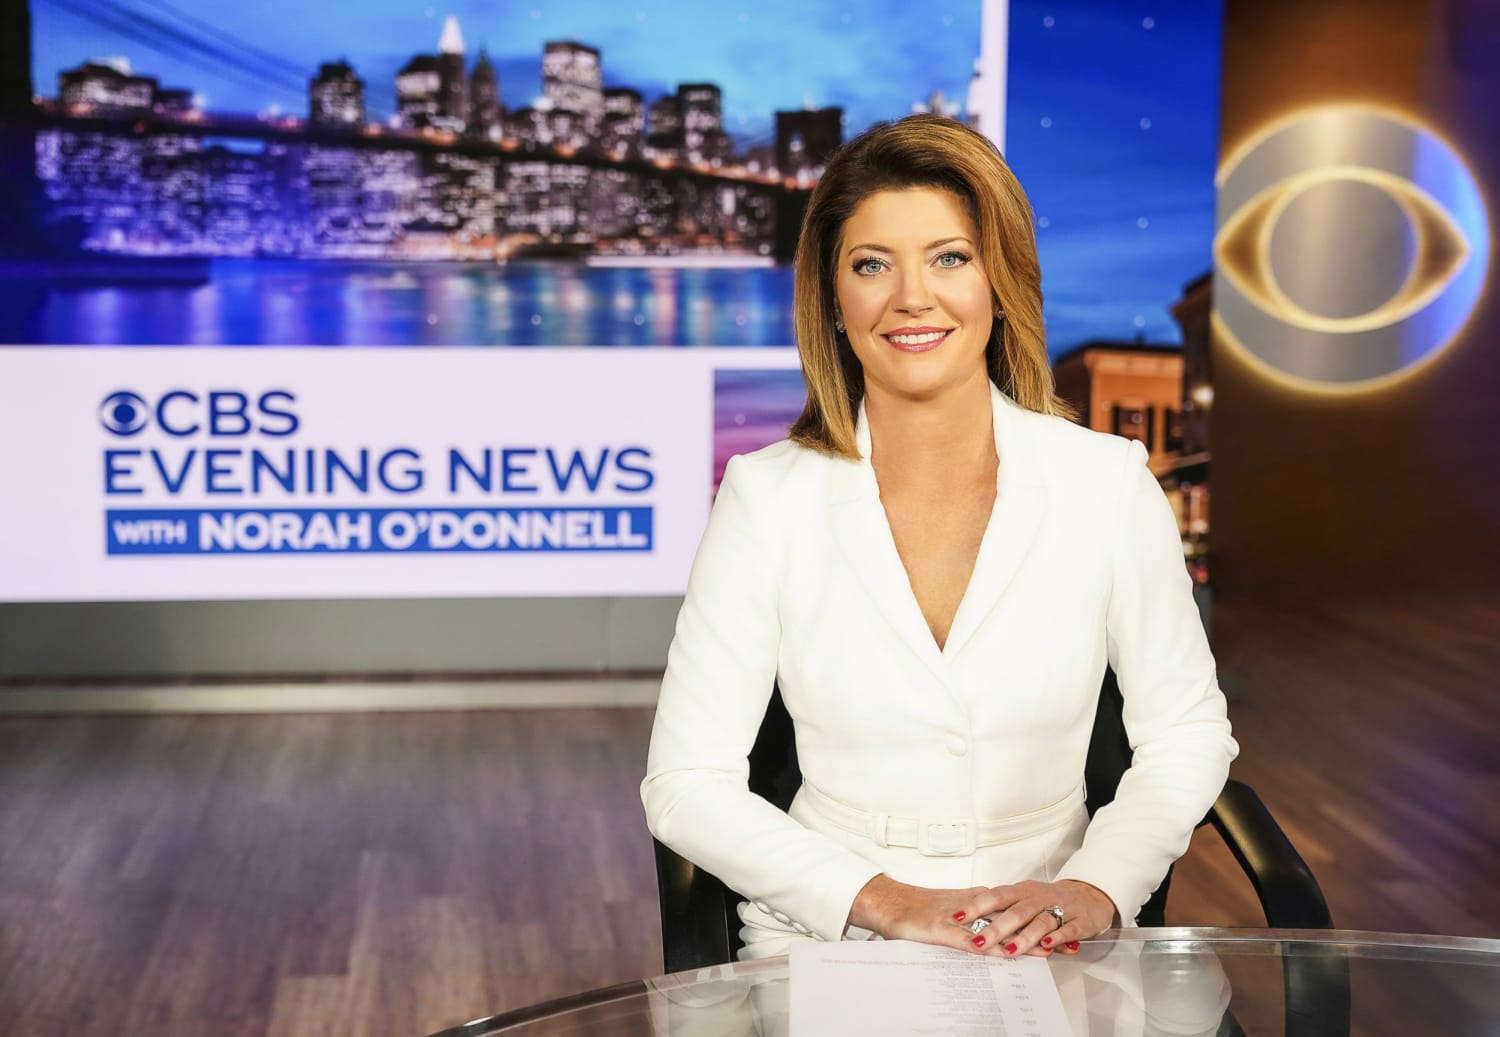 Norah o'donnell naked